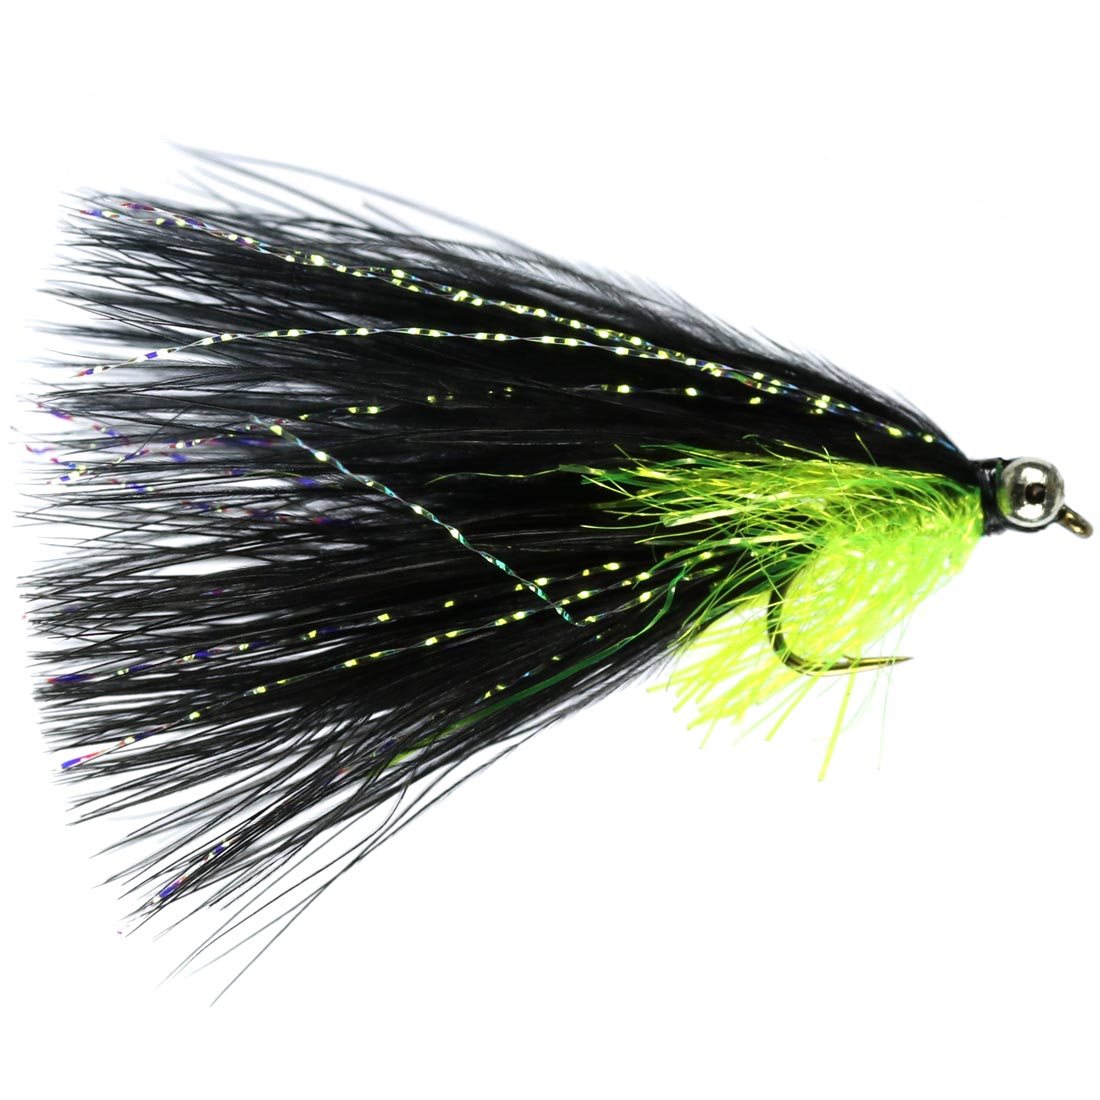 Black cats Whisker (Size 10)